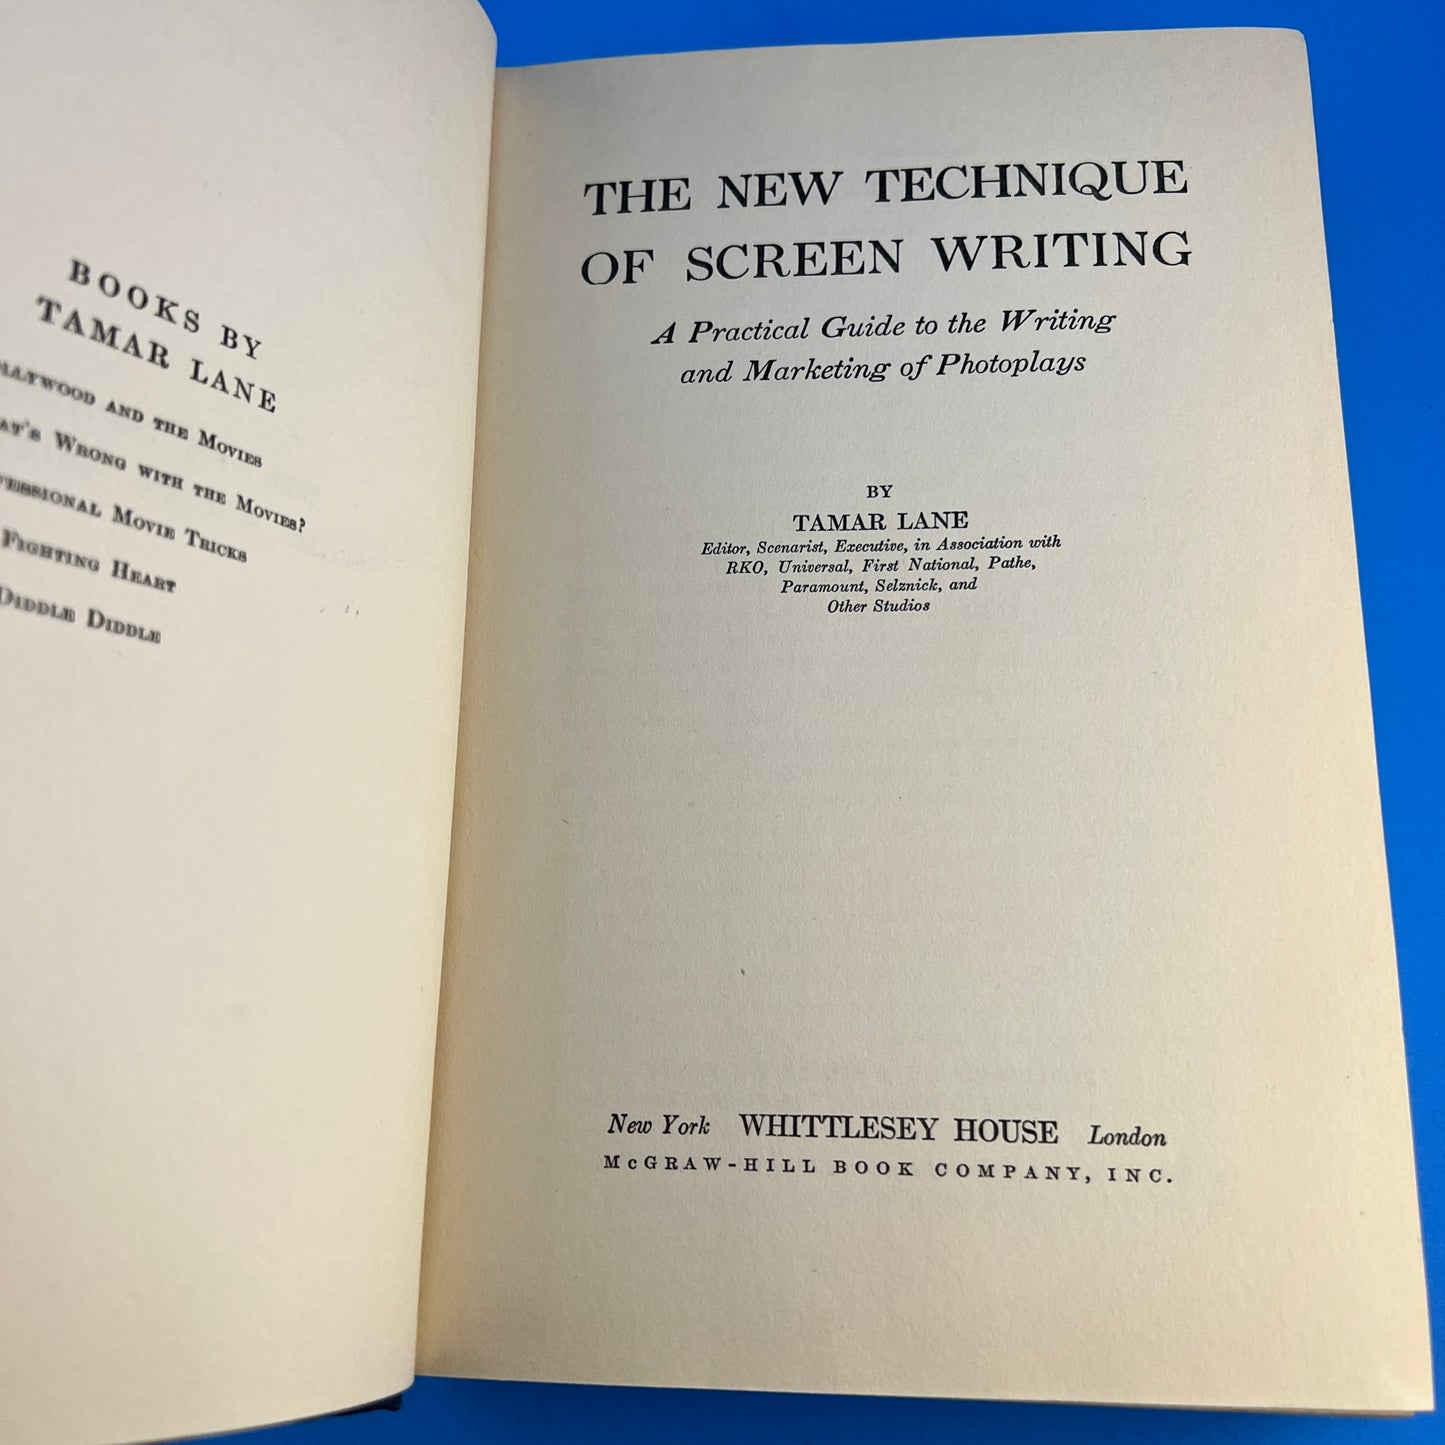 The New Technique of Screen Writing